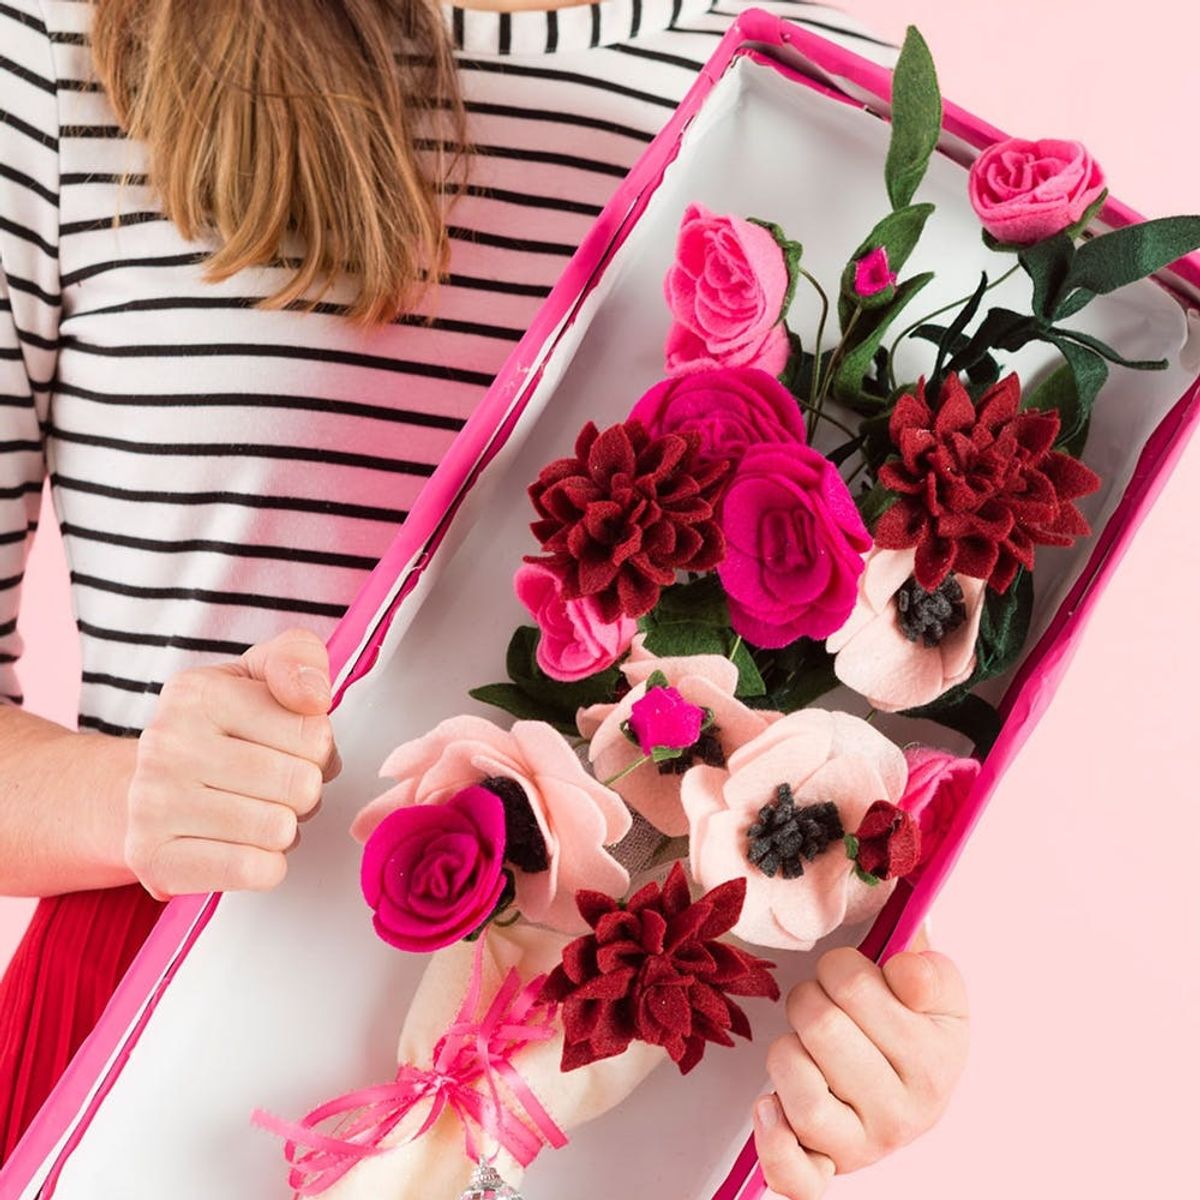 Send Your BFF This Felt Bouquet for Galentine’s Day